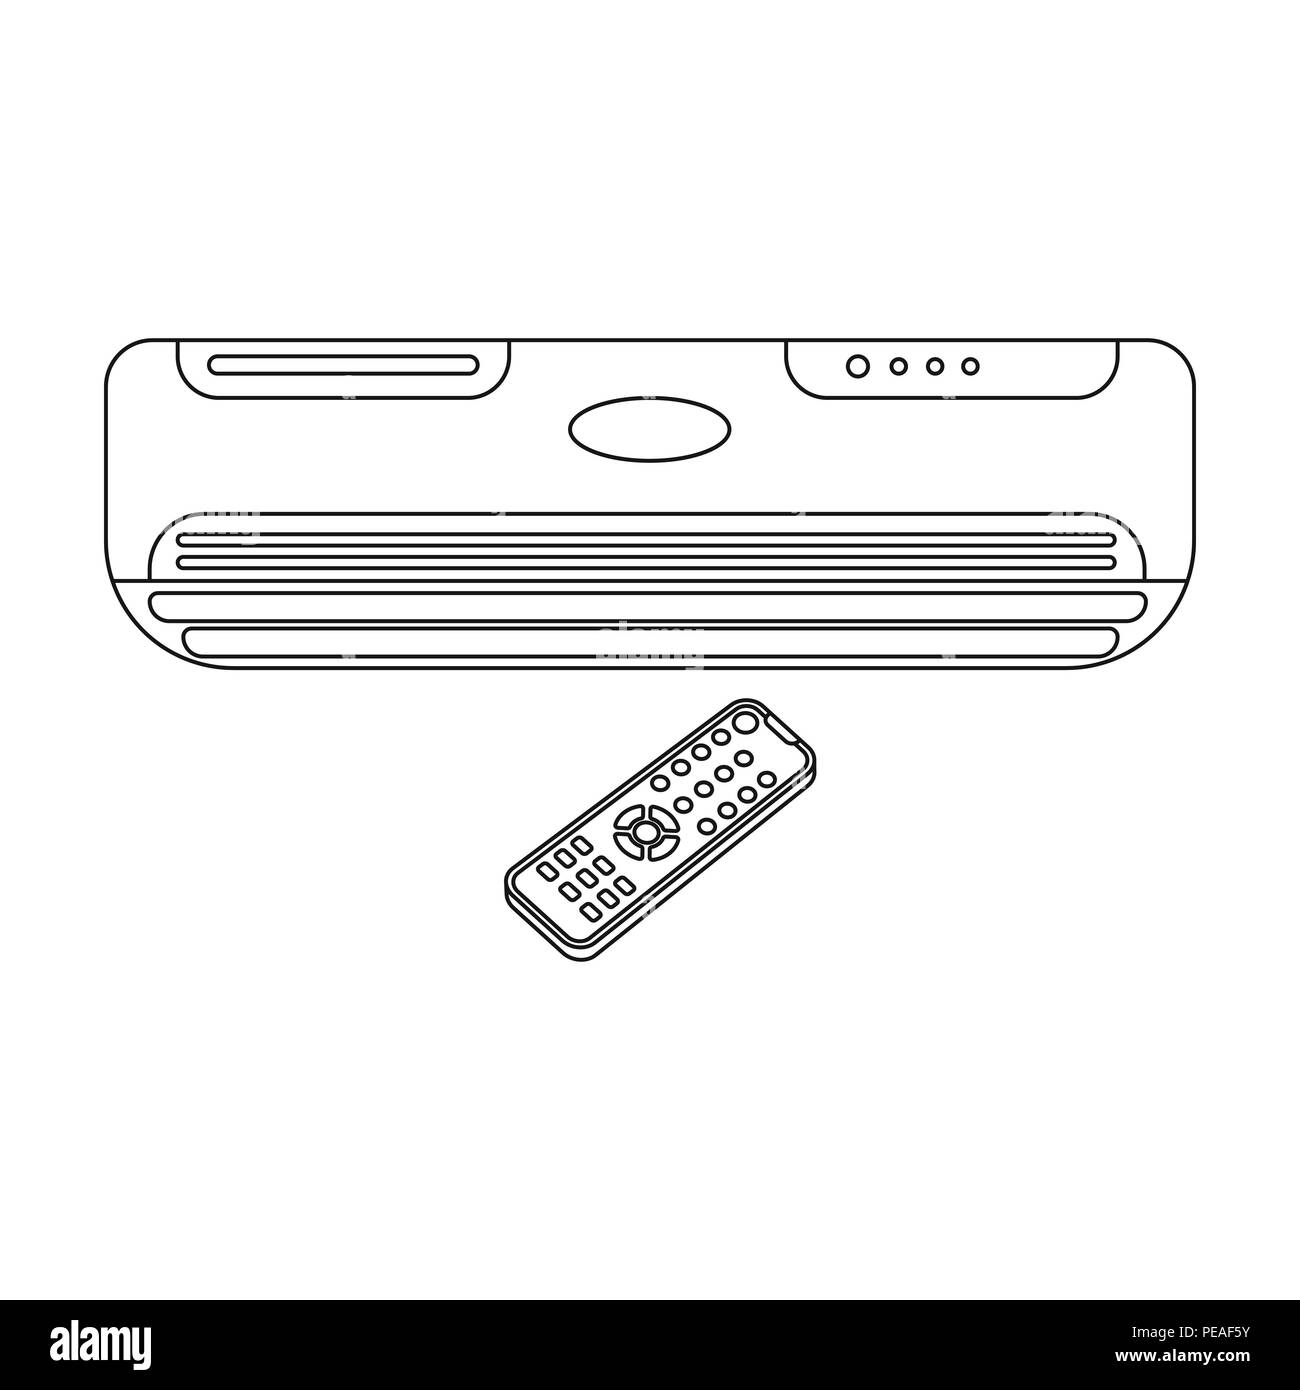 Device-air-cond-outlet-outline Stock Illustration - Illustration